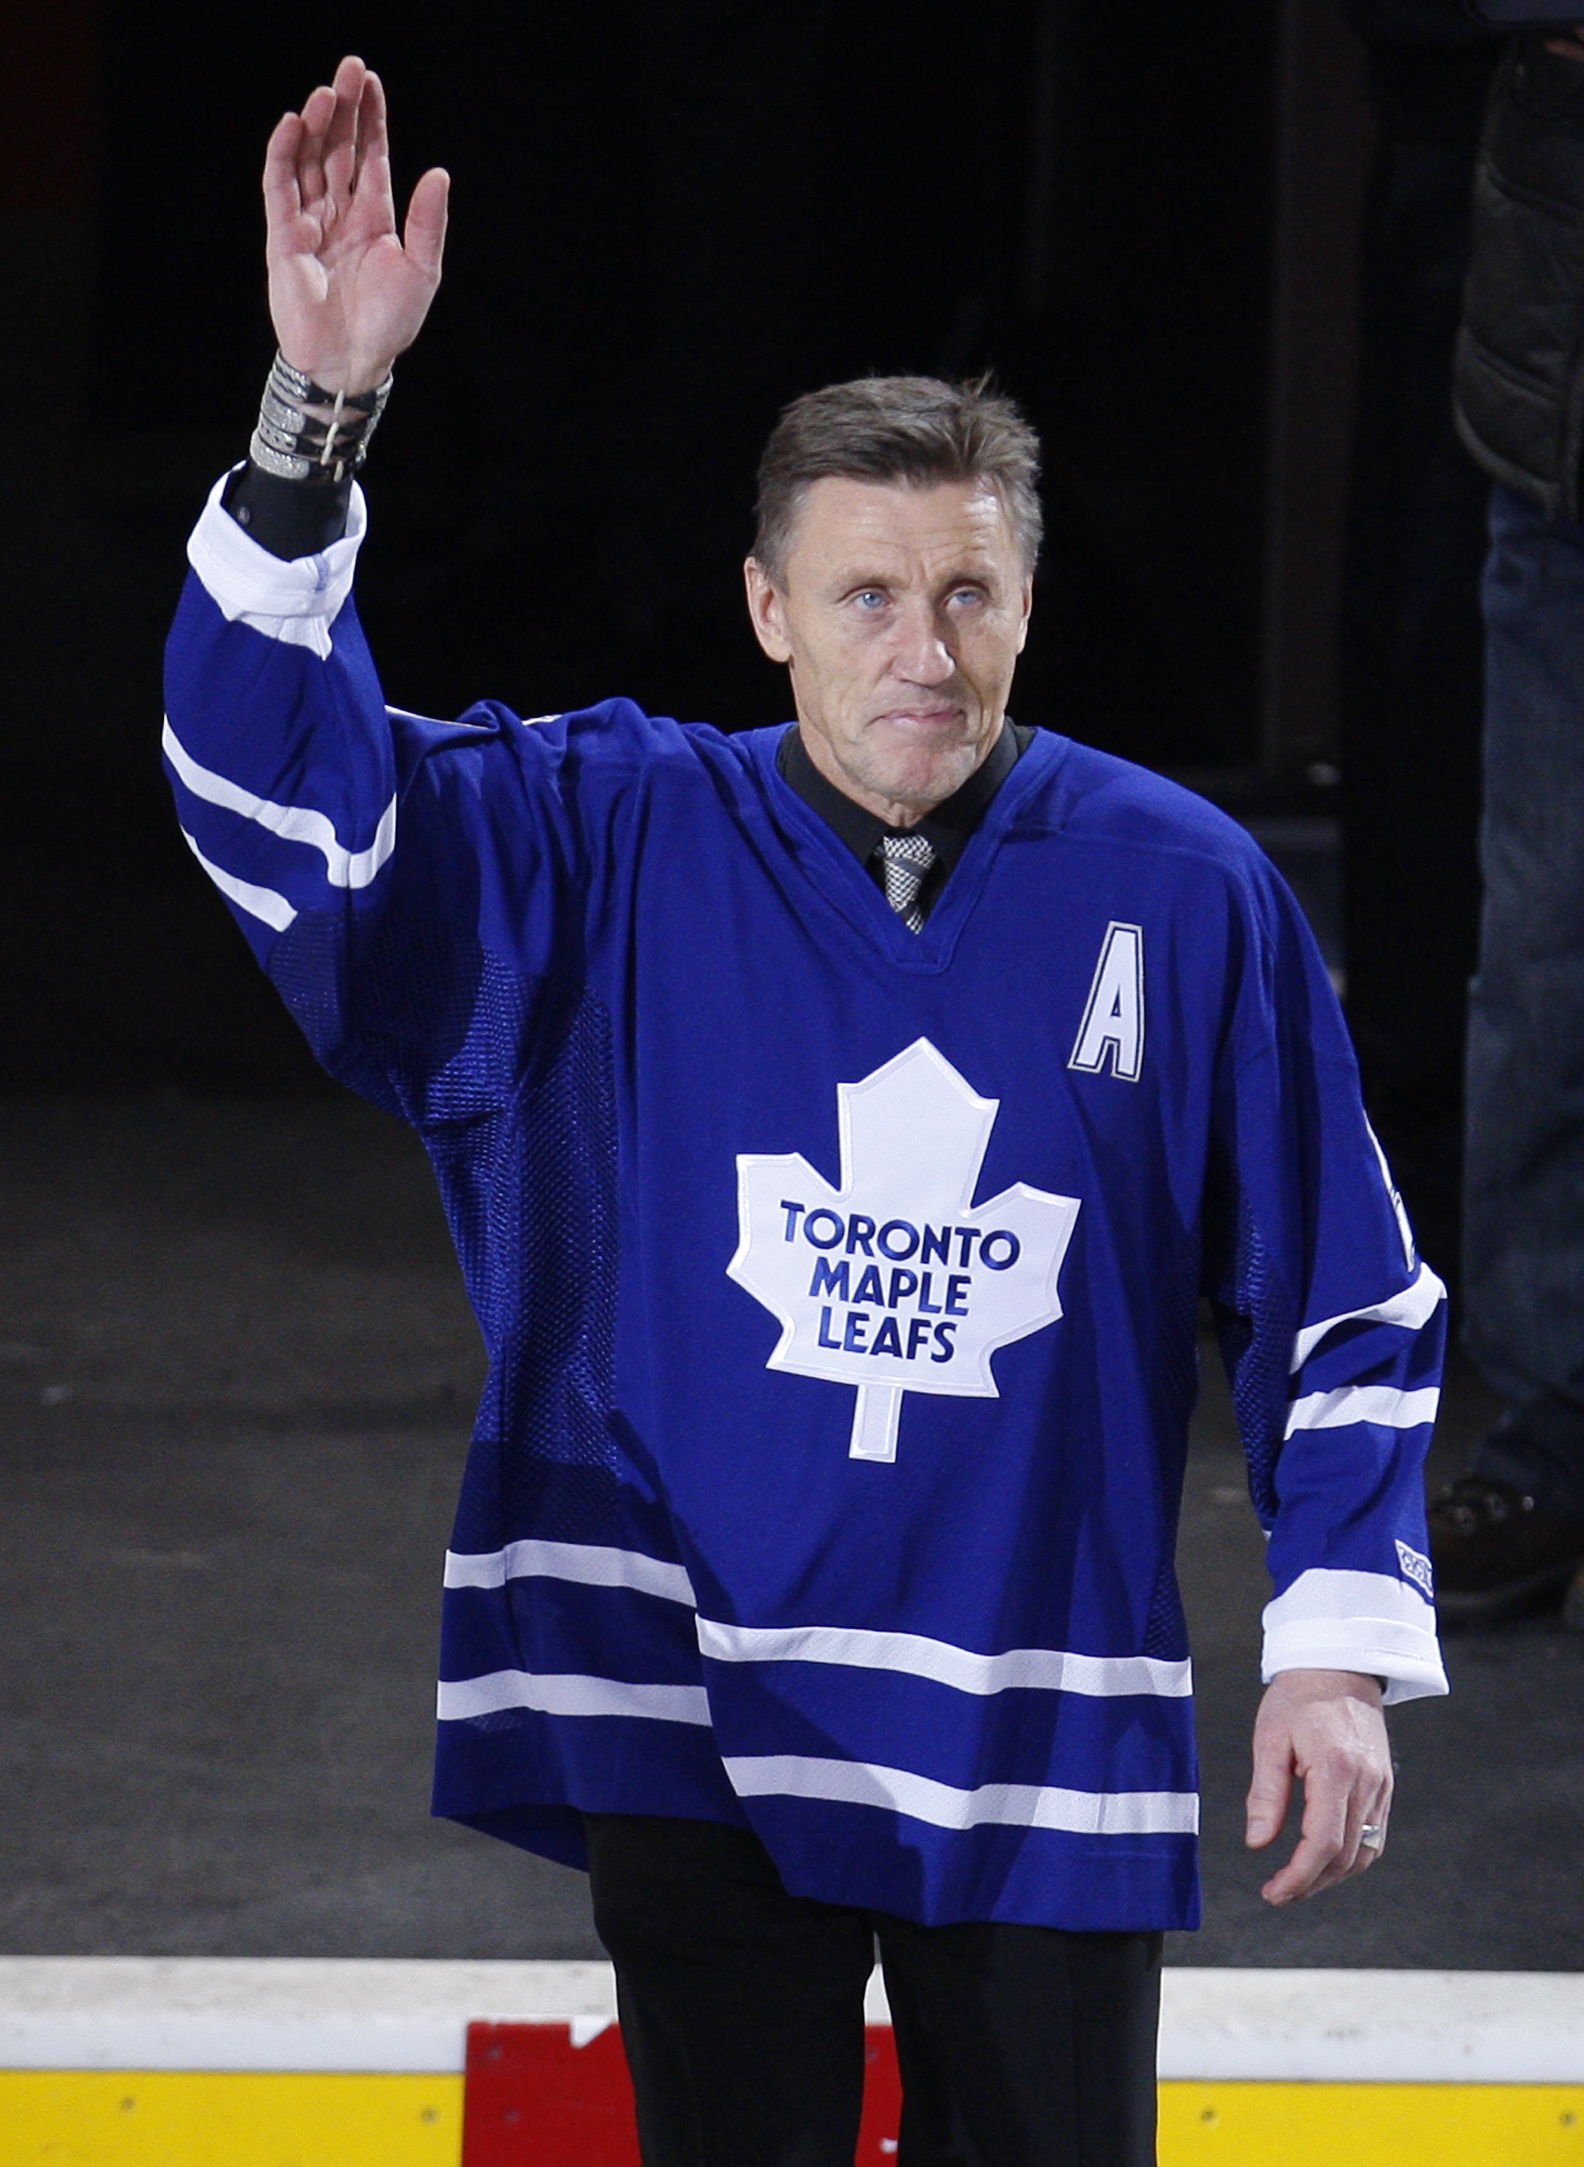 Toronto Maple Leafs great Borje Salming waves during a pre-game ceremony before the team's NHL hockey game against the Montreal Canadiens